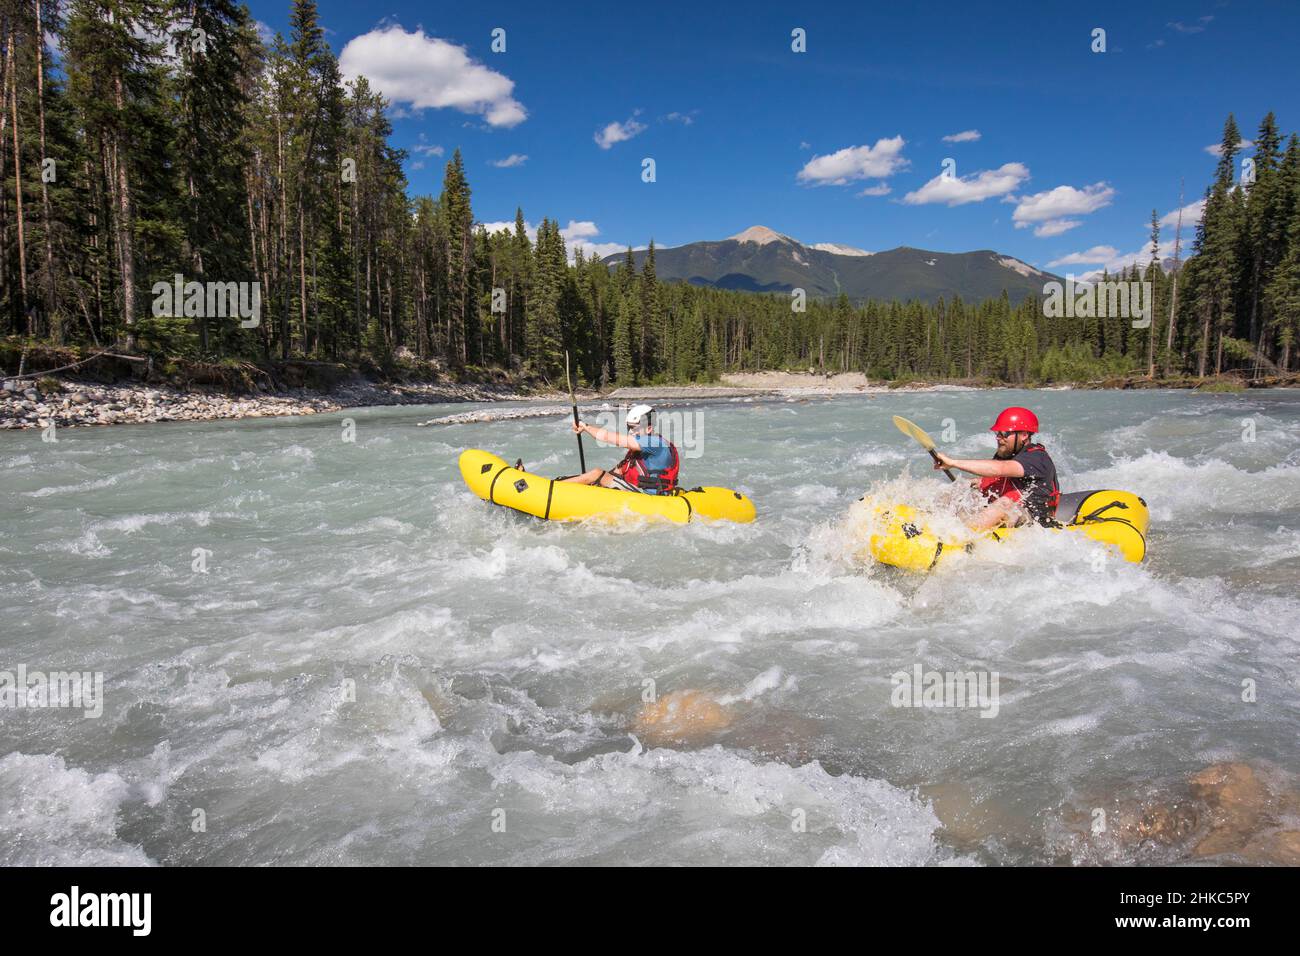 Two men packrafting through white water, Kootney National Park. Stock Photo